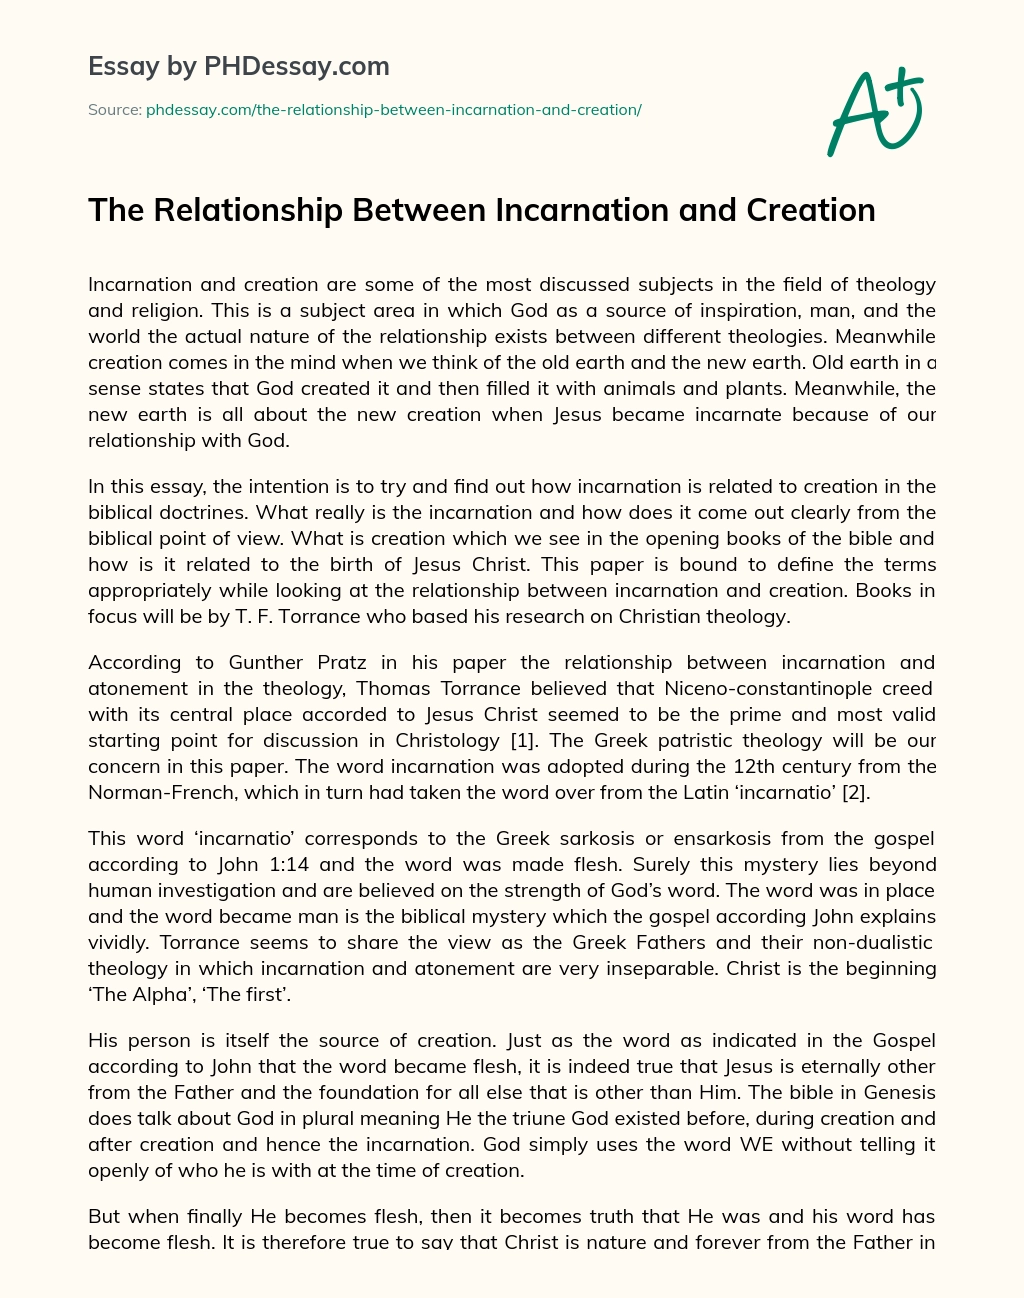 The Relationship Between Incarnation and Creation essay